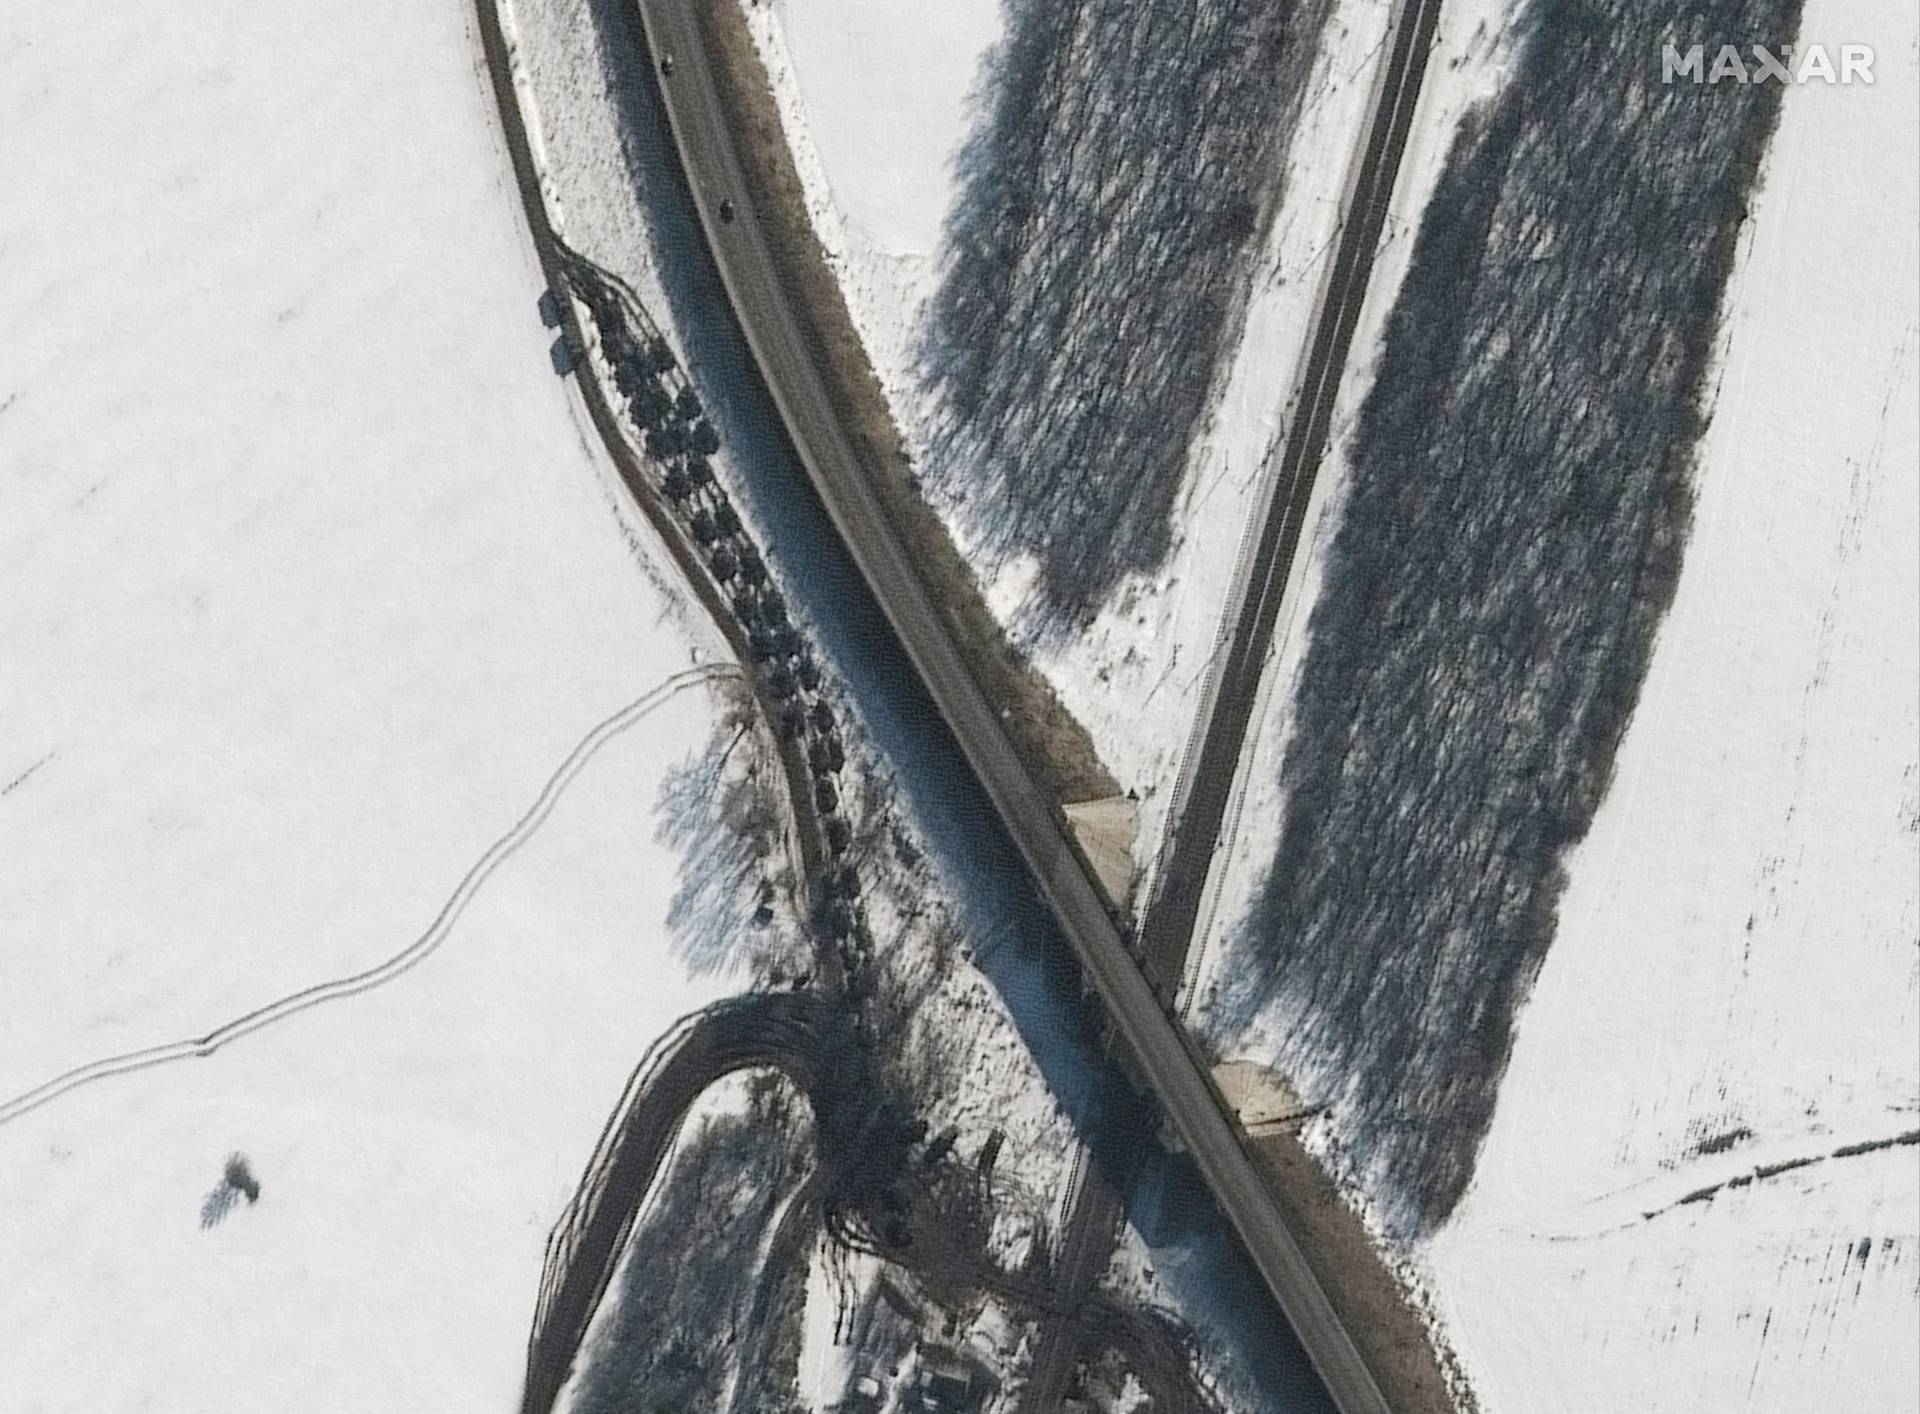 A satellite image shows an armor batalion heading south, in Soloti